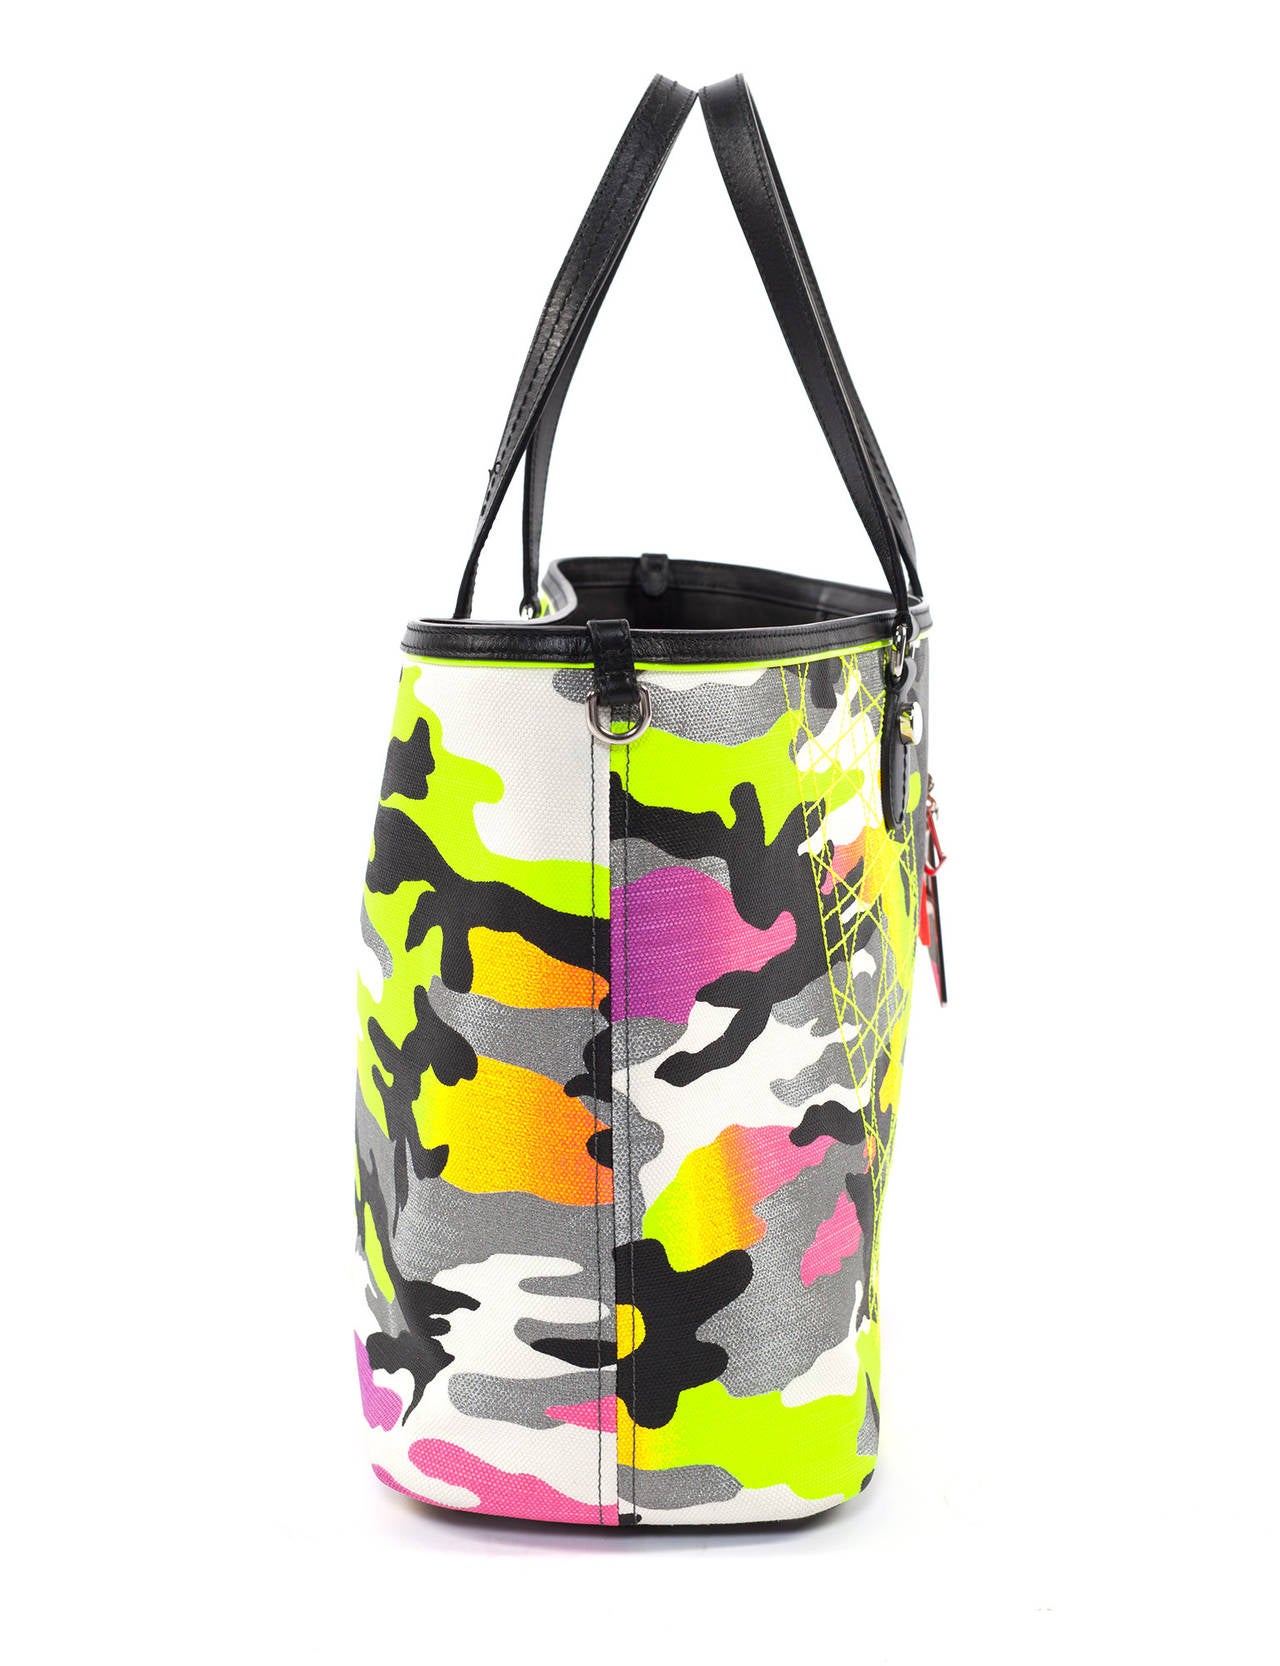 Women's Dior X Anselm Rhyle Neon Camouflage large tote bag from SS 2012